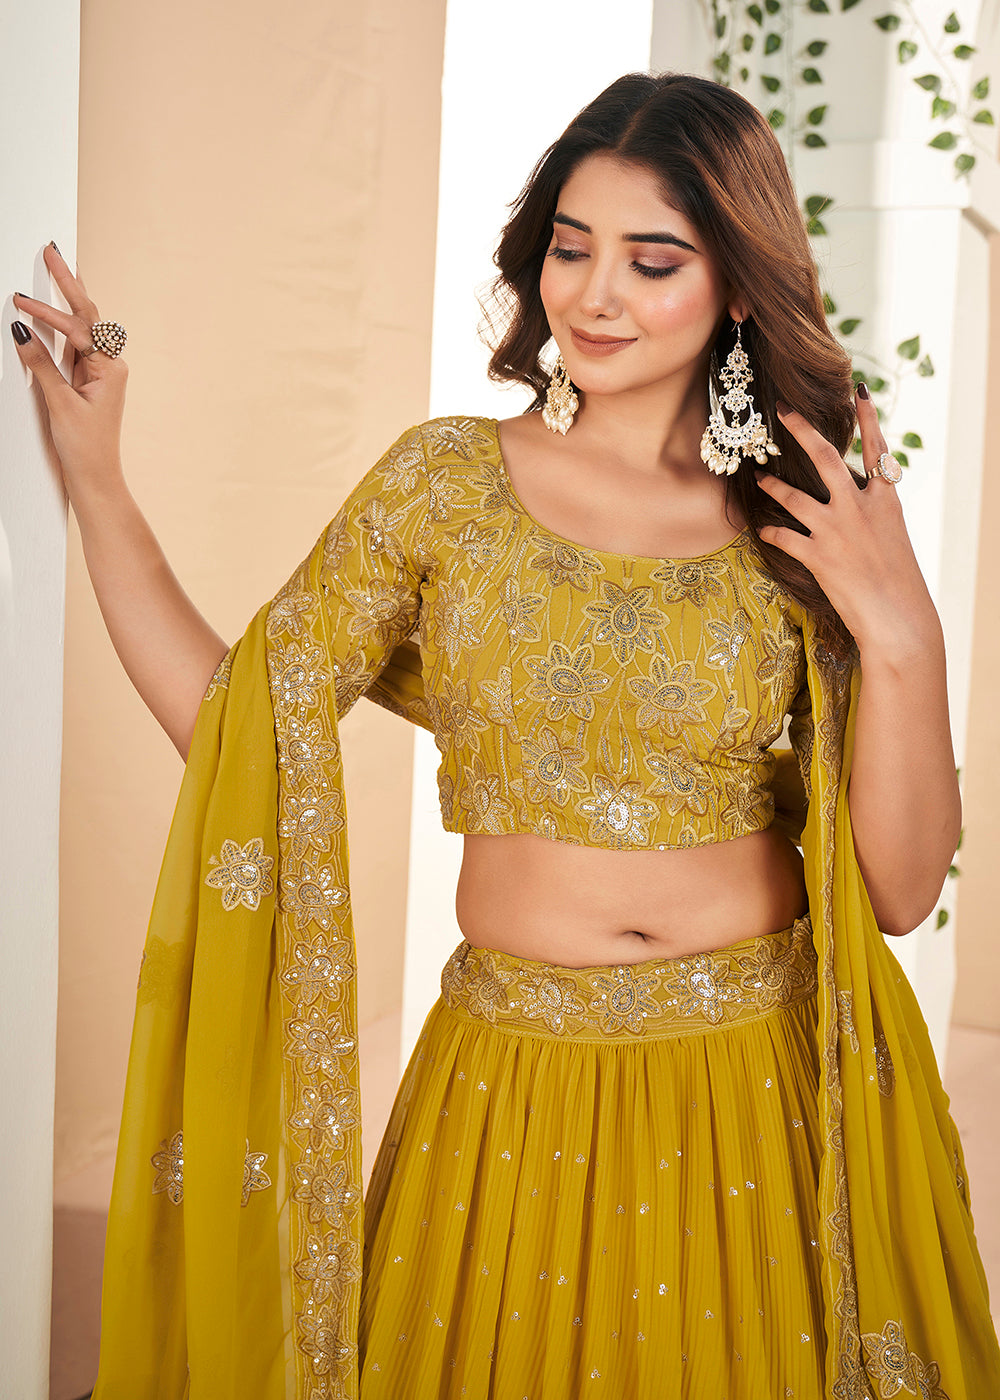 Buy Now Mustard Thread & Sequins Wedding Party Lehenga Choli Online in USA, UK, Canada & Worldwide at Empress Clothing.